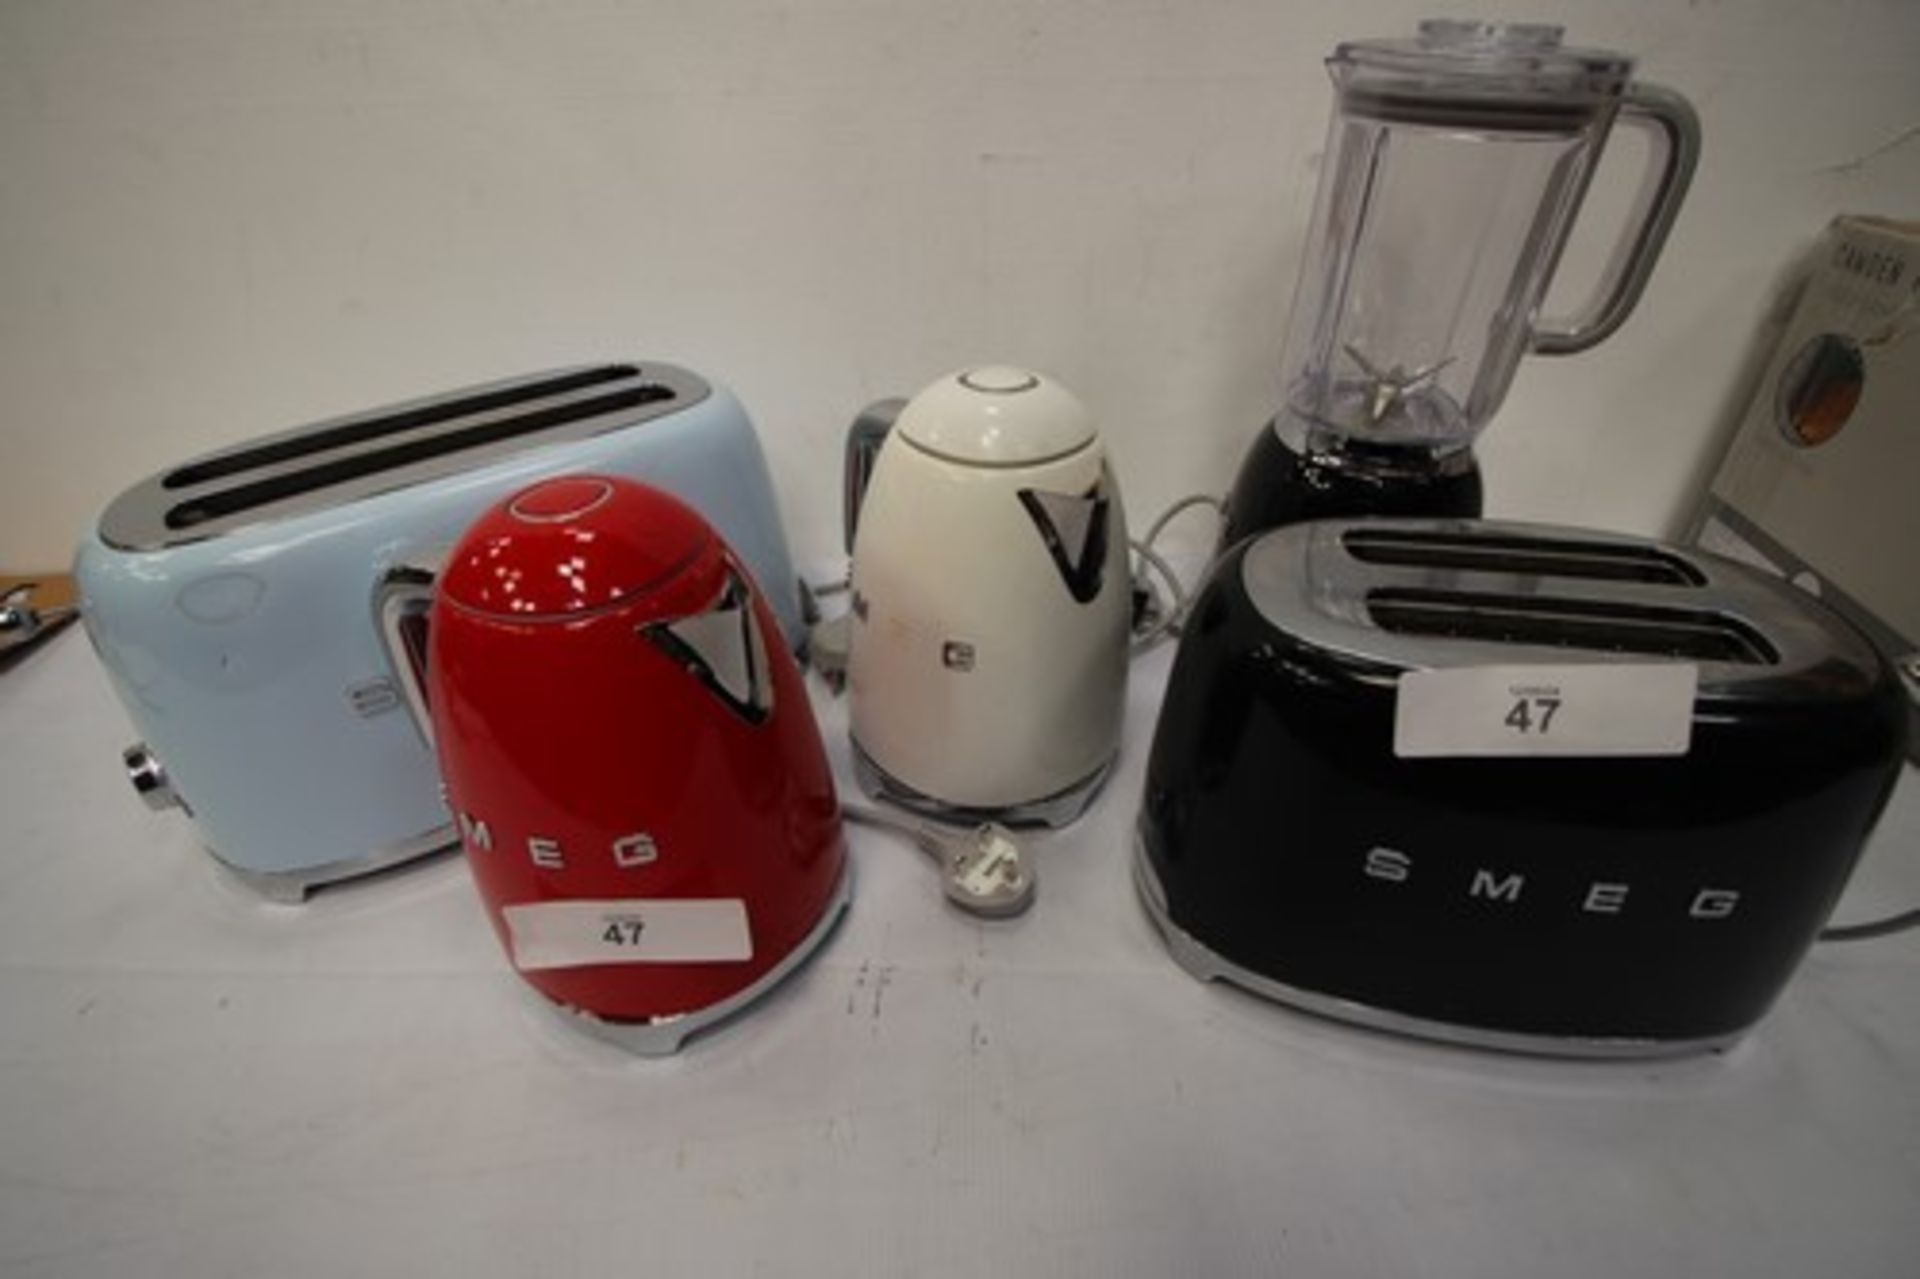 5 x Smeg kitchen appliances, including blender, toaster and kettles, etc., all untested - spares (